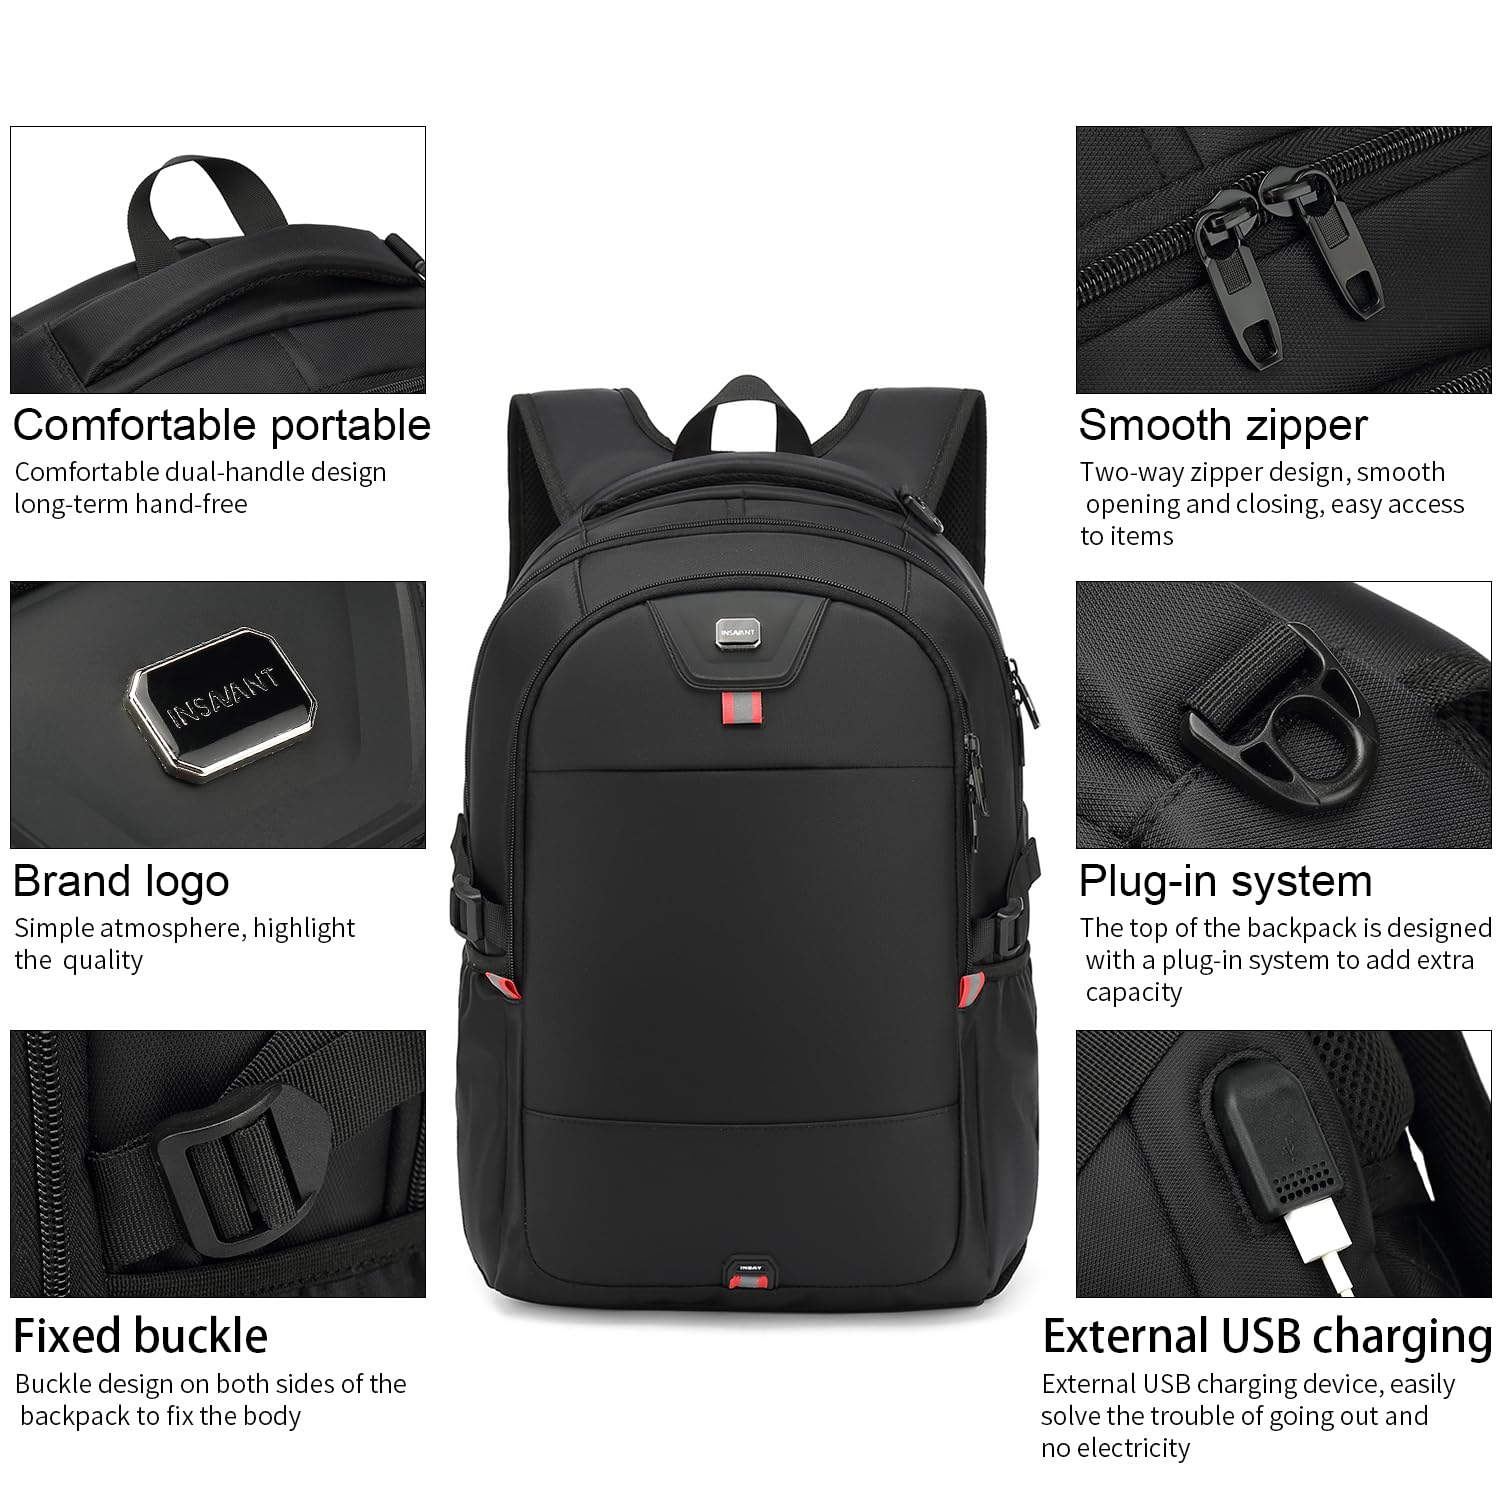 INSAVANT Laptop Backpack 17.3 Inch TSA Friendly Travel Backpacks Extra Large Durable College Travel Daypack Anti Theft with USB Charging Port Best Gift for Men Women(17.3 Inch, Black)